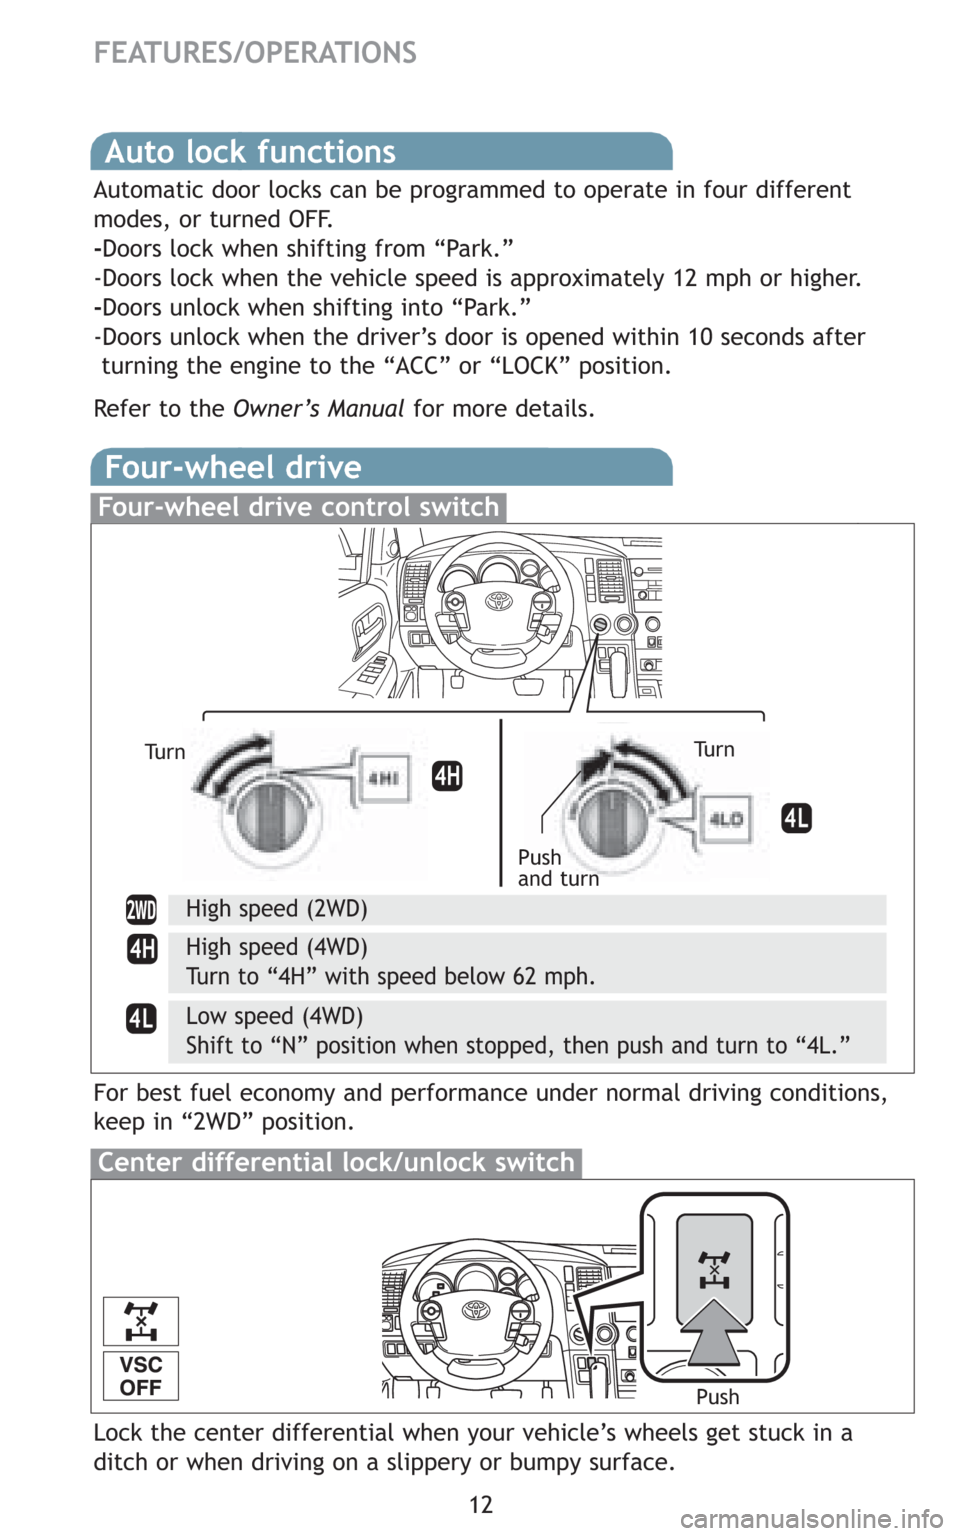 TOYOTA SEQUOIA 2008 2.G Quick Reference Guide 12
FEATURES/OPERATIONS
Auto lock functions
Automatic door locks can be programmed to operate in four different
modes, or turned OFF.
-Doors lock when shifting from “Park.”
-Doors lock when the veh